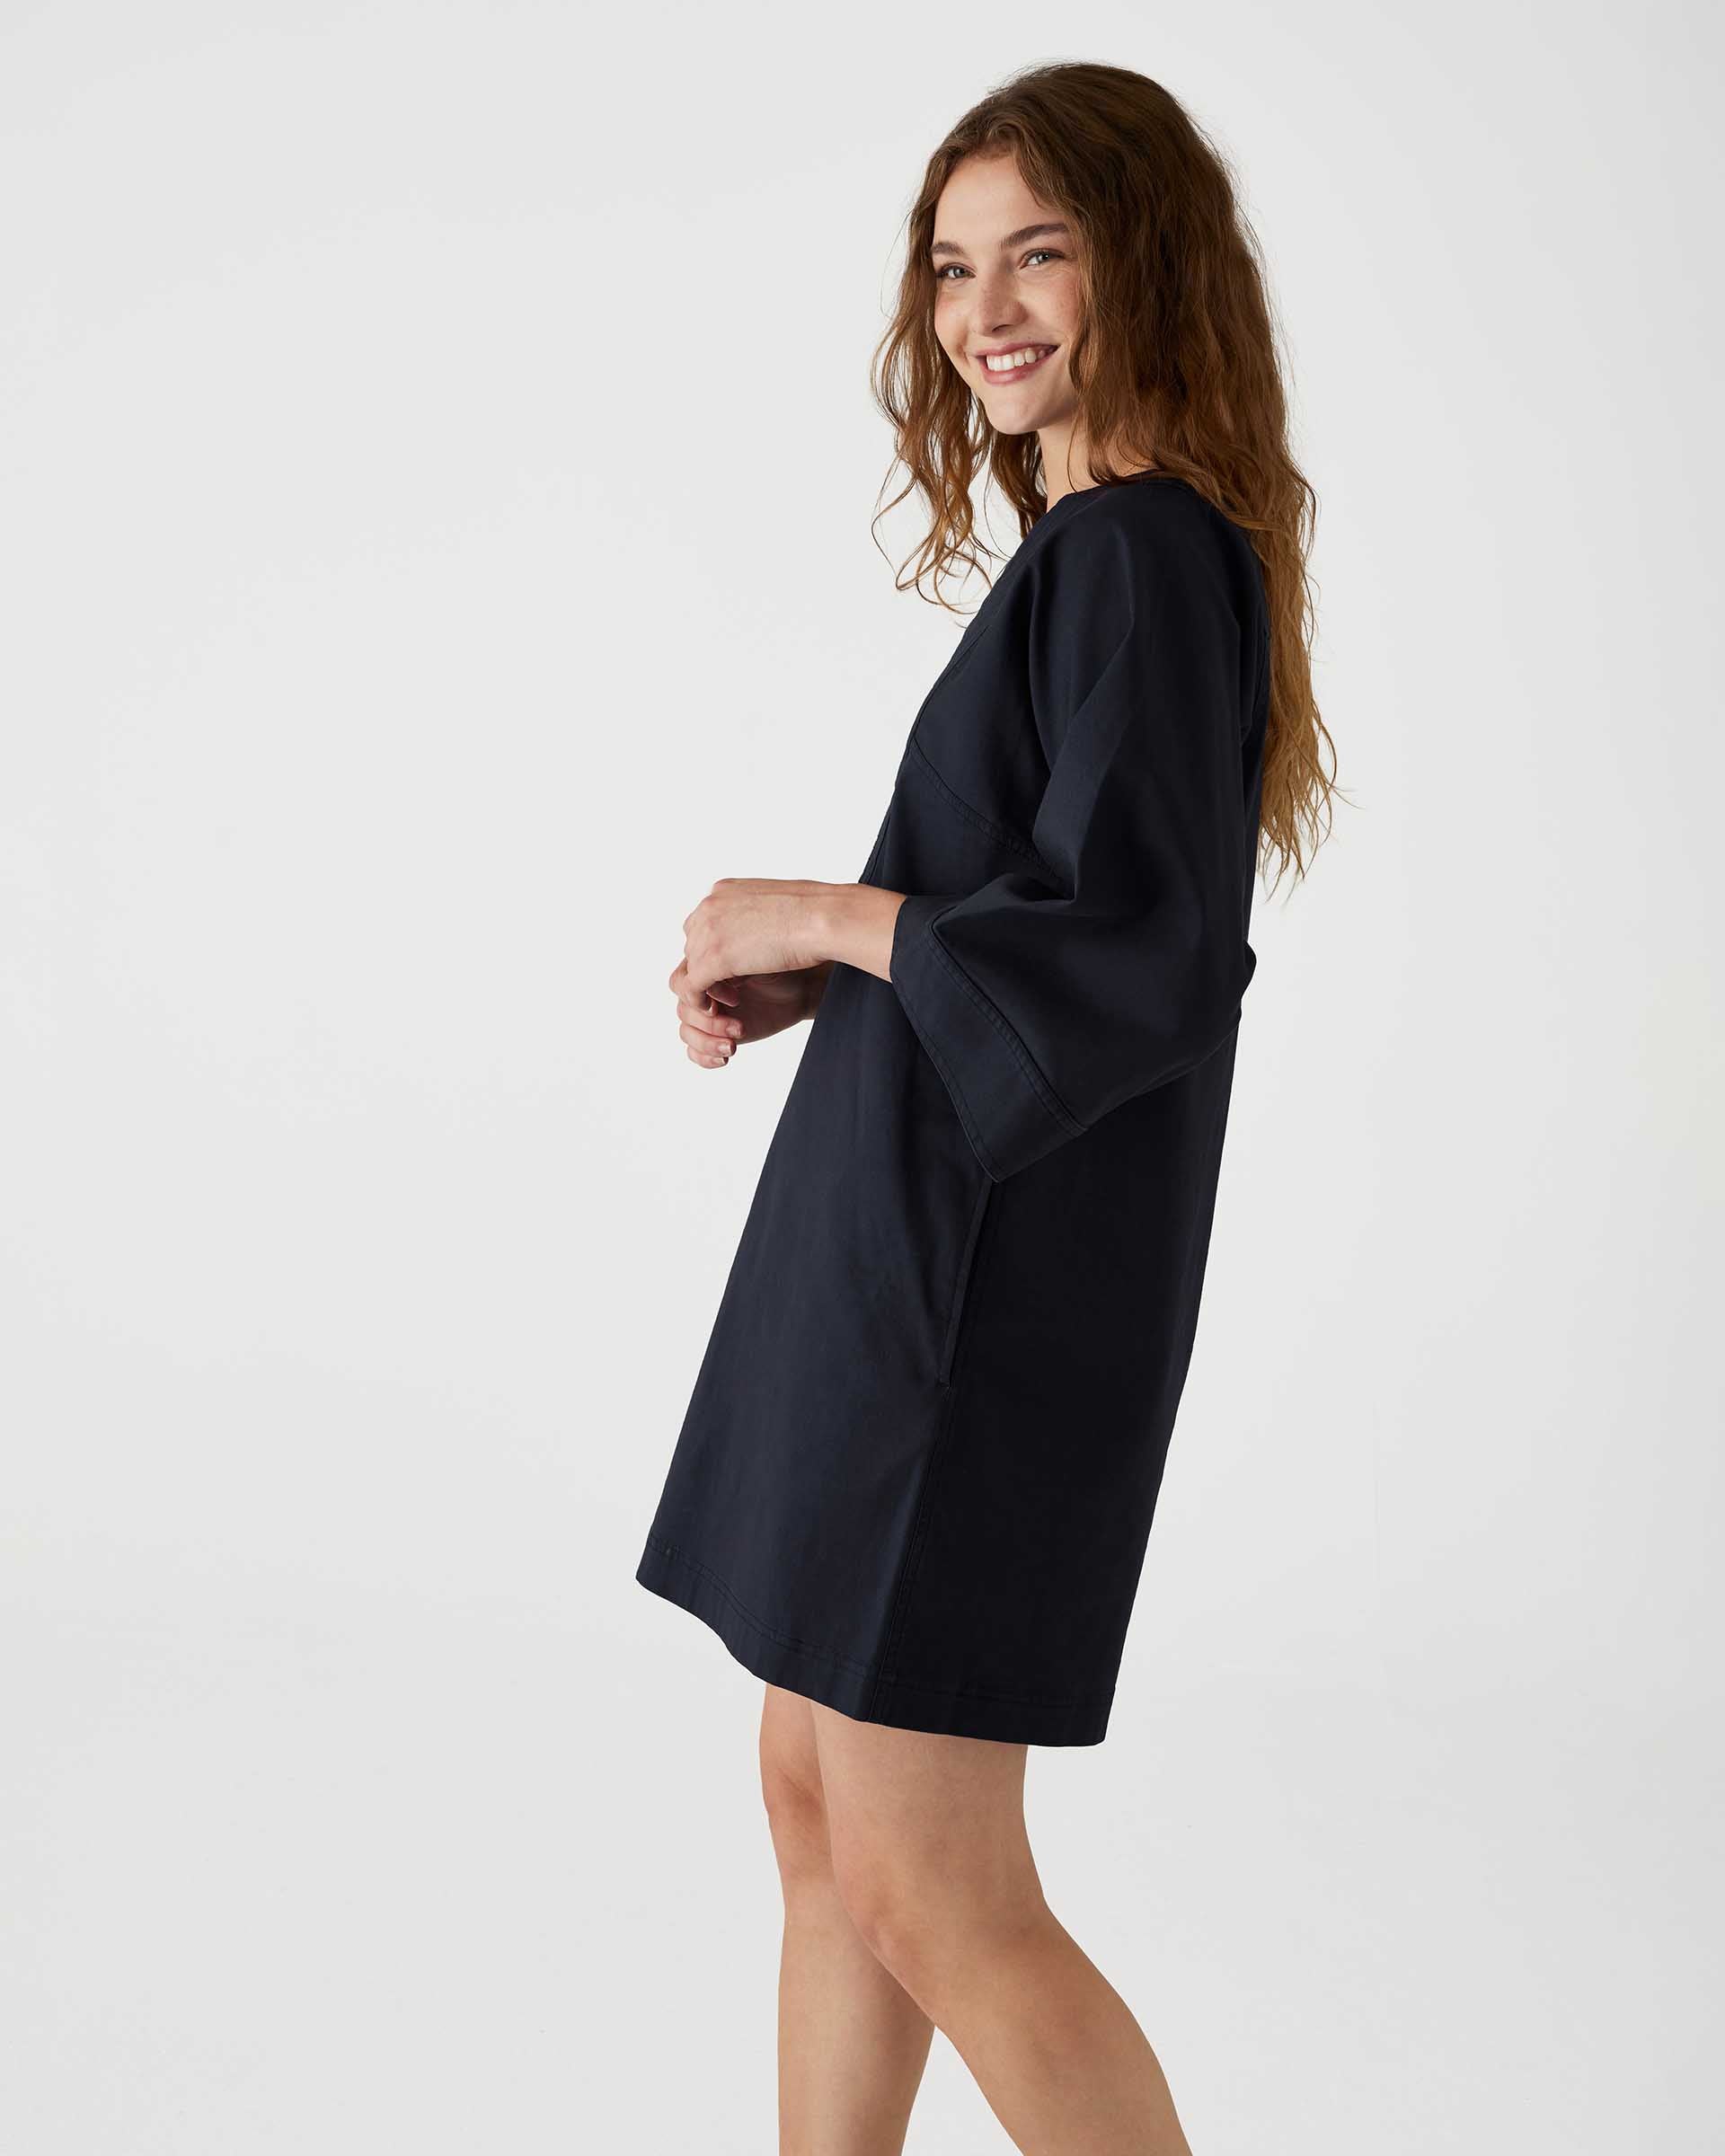 profile of woman showcasing mersea navy tunic dress with v neck